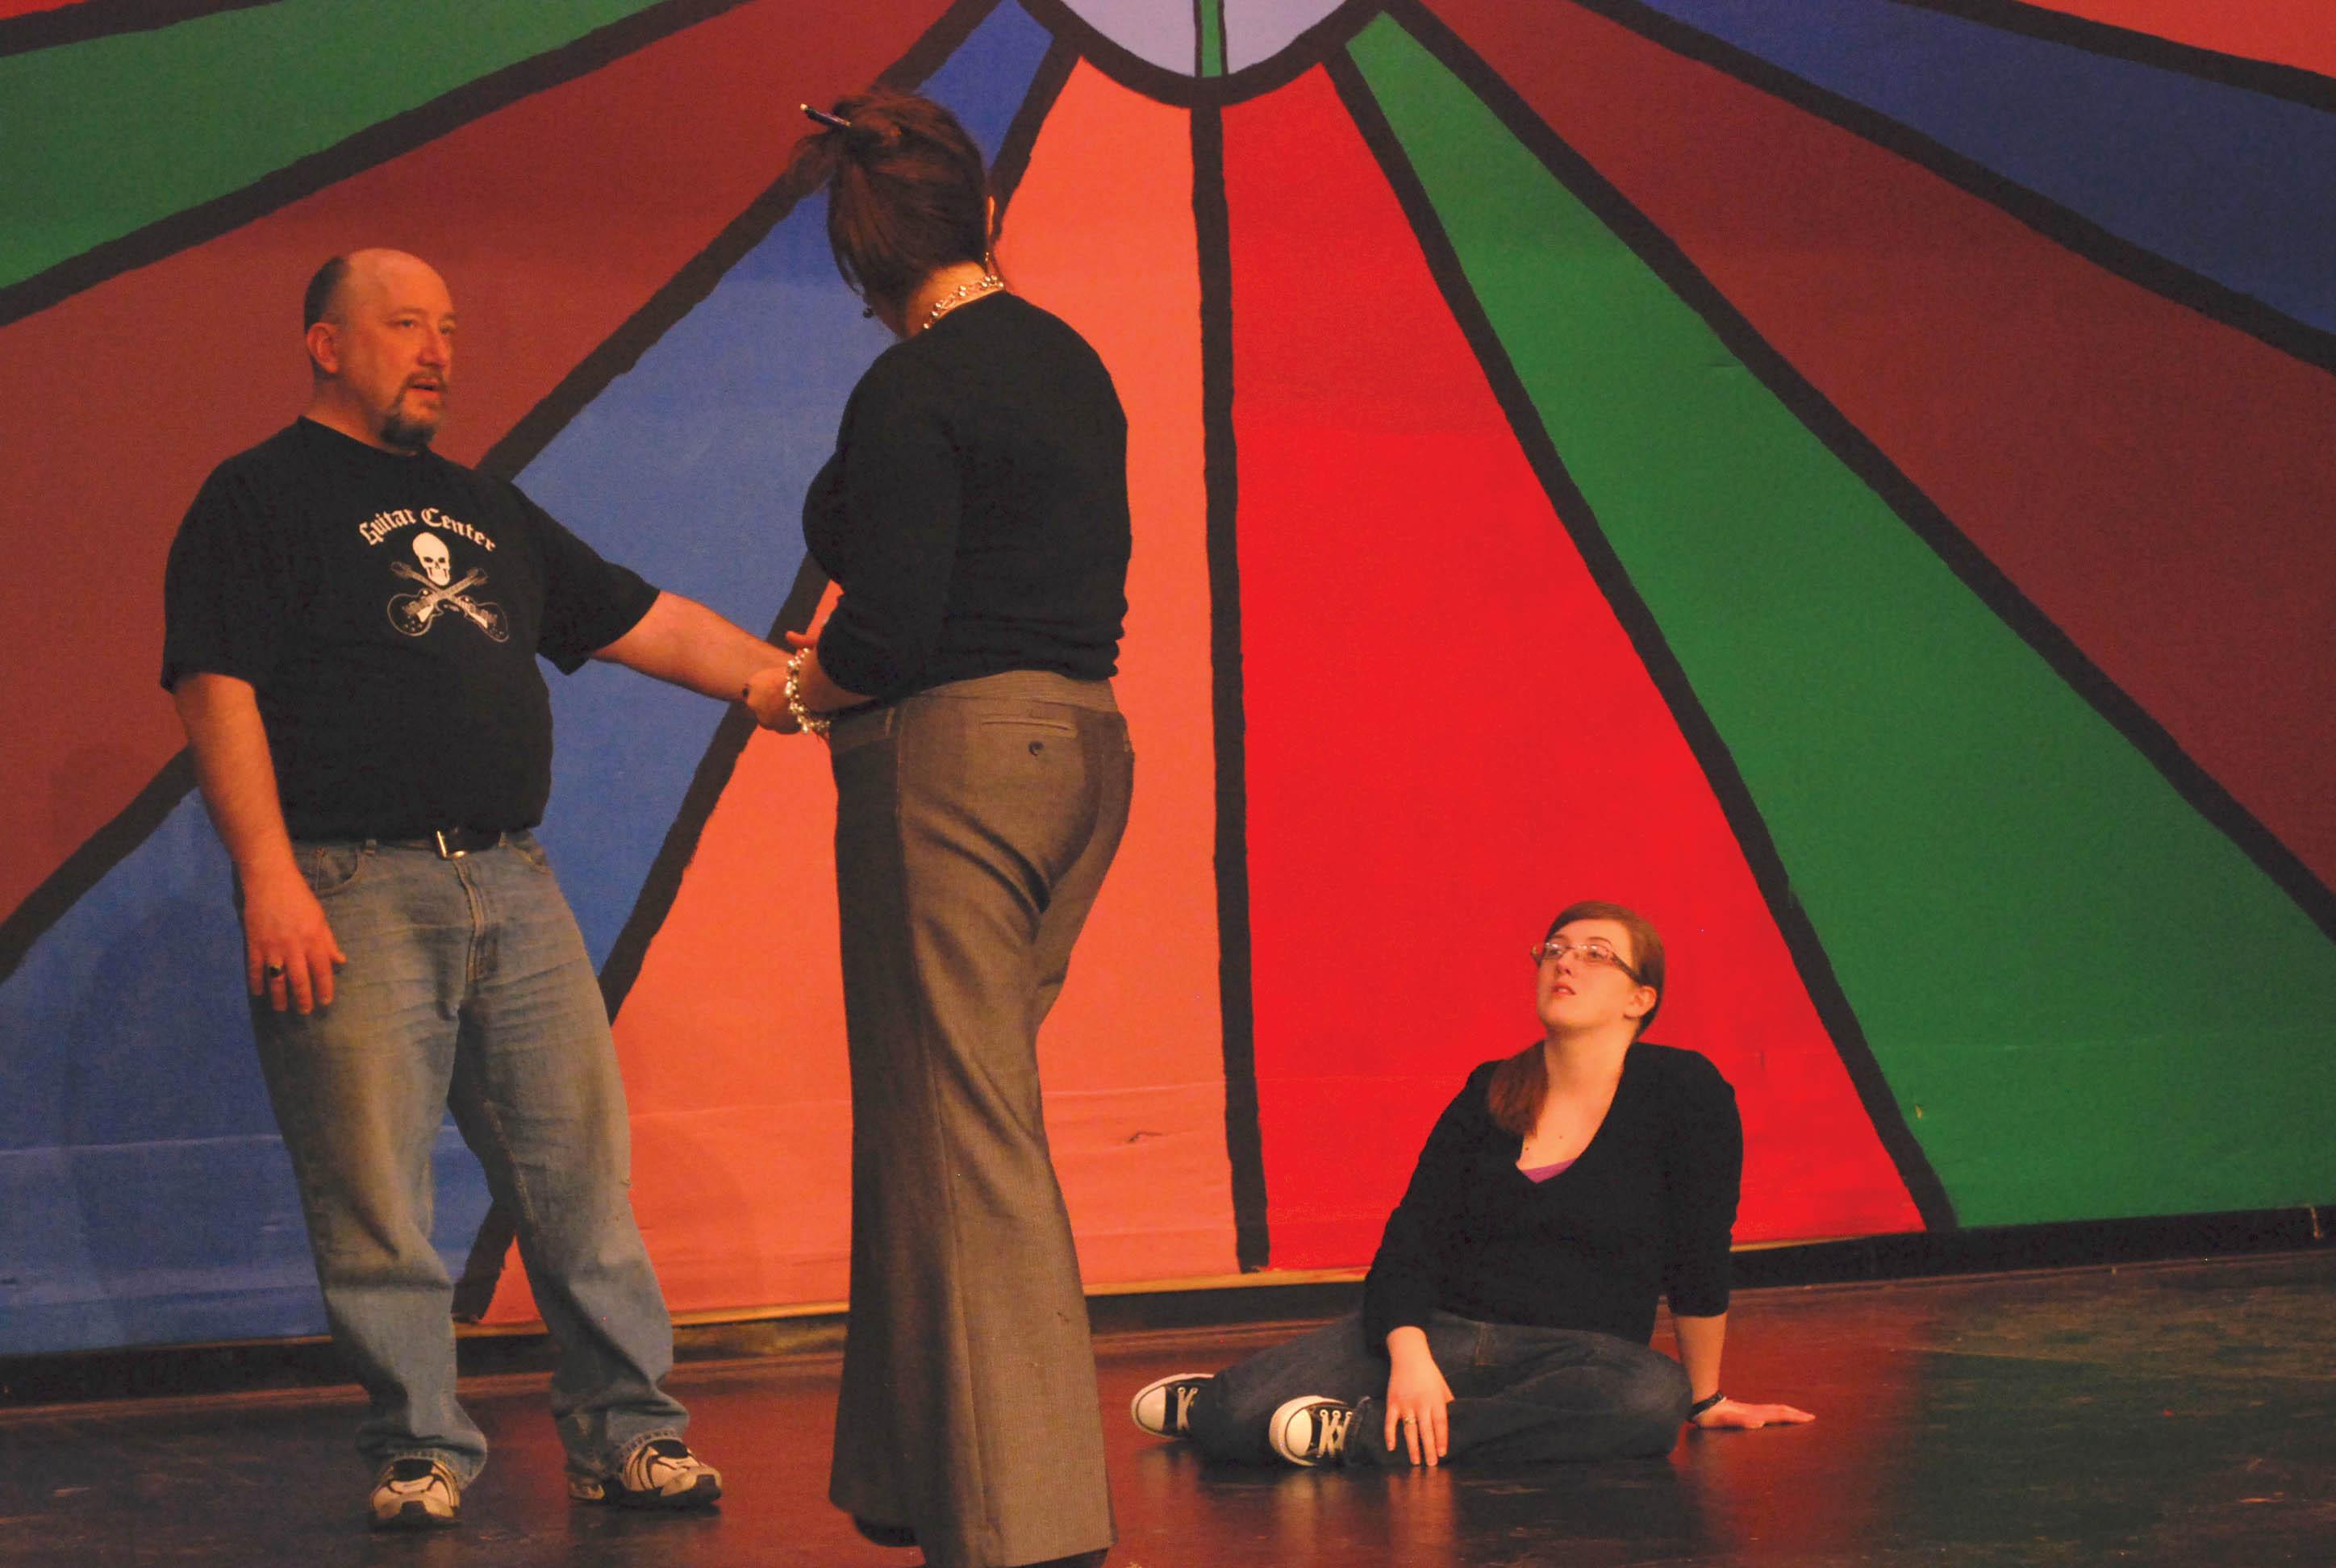 Crusader photo/ Jose Rodriguez
Alison Chambers directs Tony Claus and Lauren Peck in a scene. The musical “Beauty and the Beast” will be at 7:30 p.m. April 22-24. Tickets are $6 for a seat on the side and $8 for center seats. They will be $10 at the door. Tickets are available in the humanities office H116 or by calling 620-417-1451.  Students are admitted free of charge with a current SCCC/ ATS ID. For more backstage photographs see the multimedia section of CrusaderNews.com. 